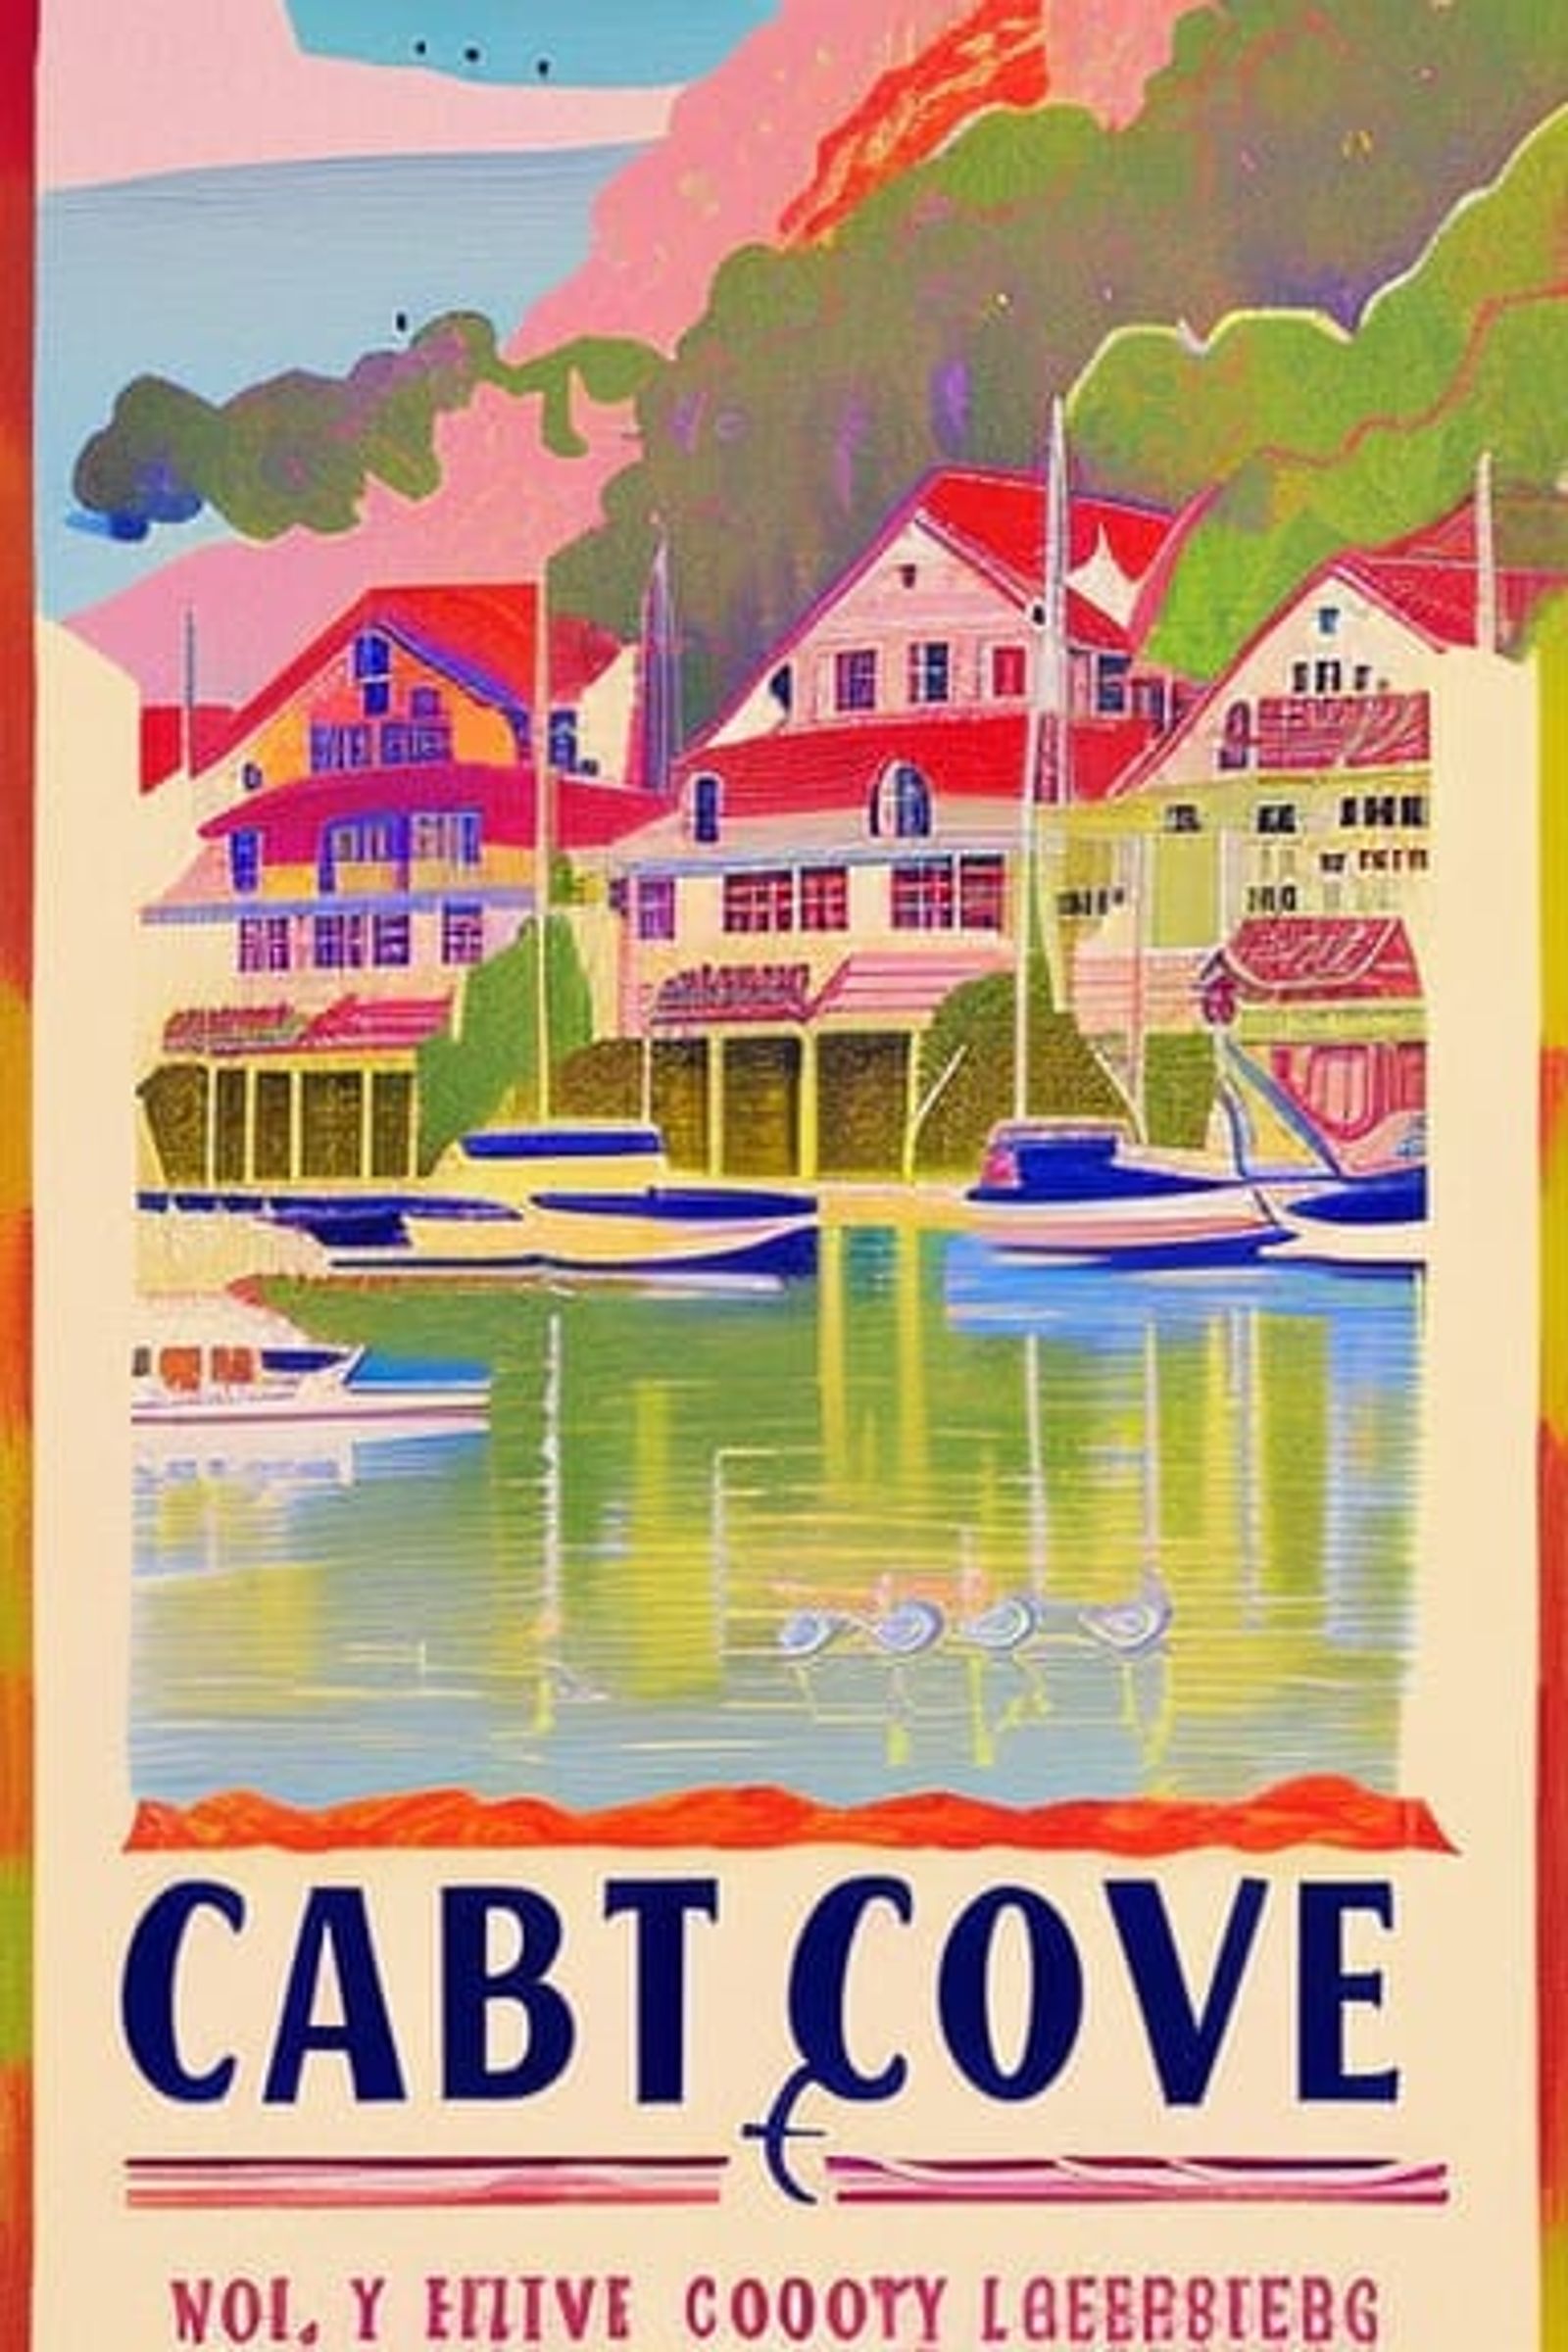 the cove poster